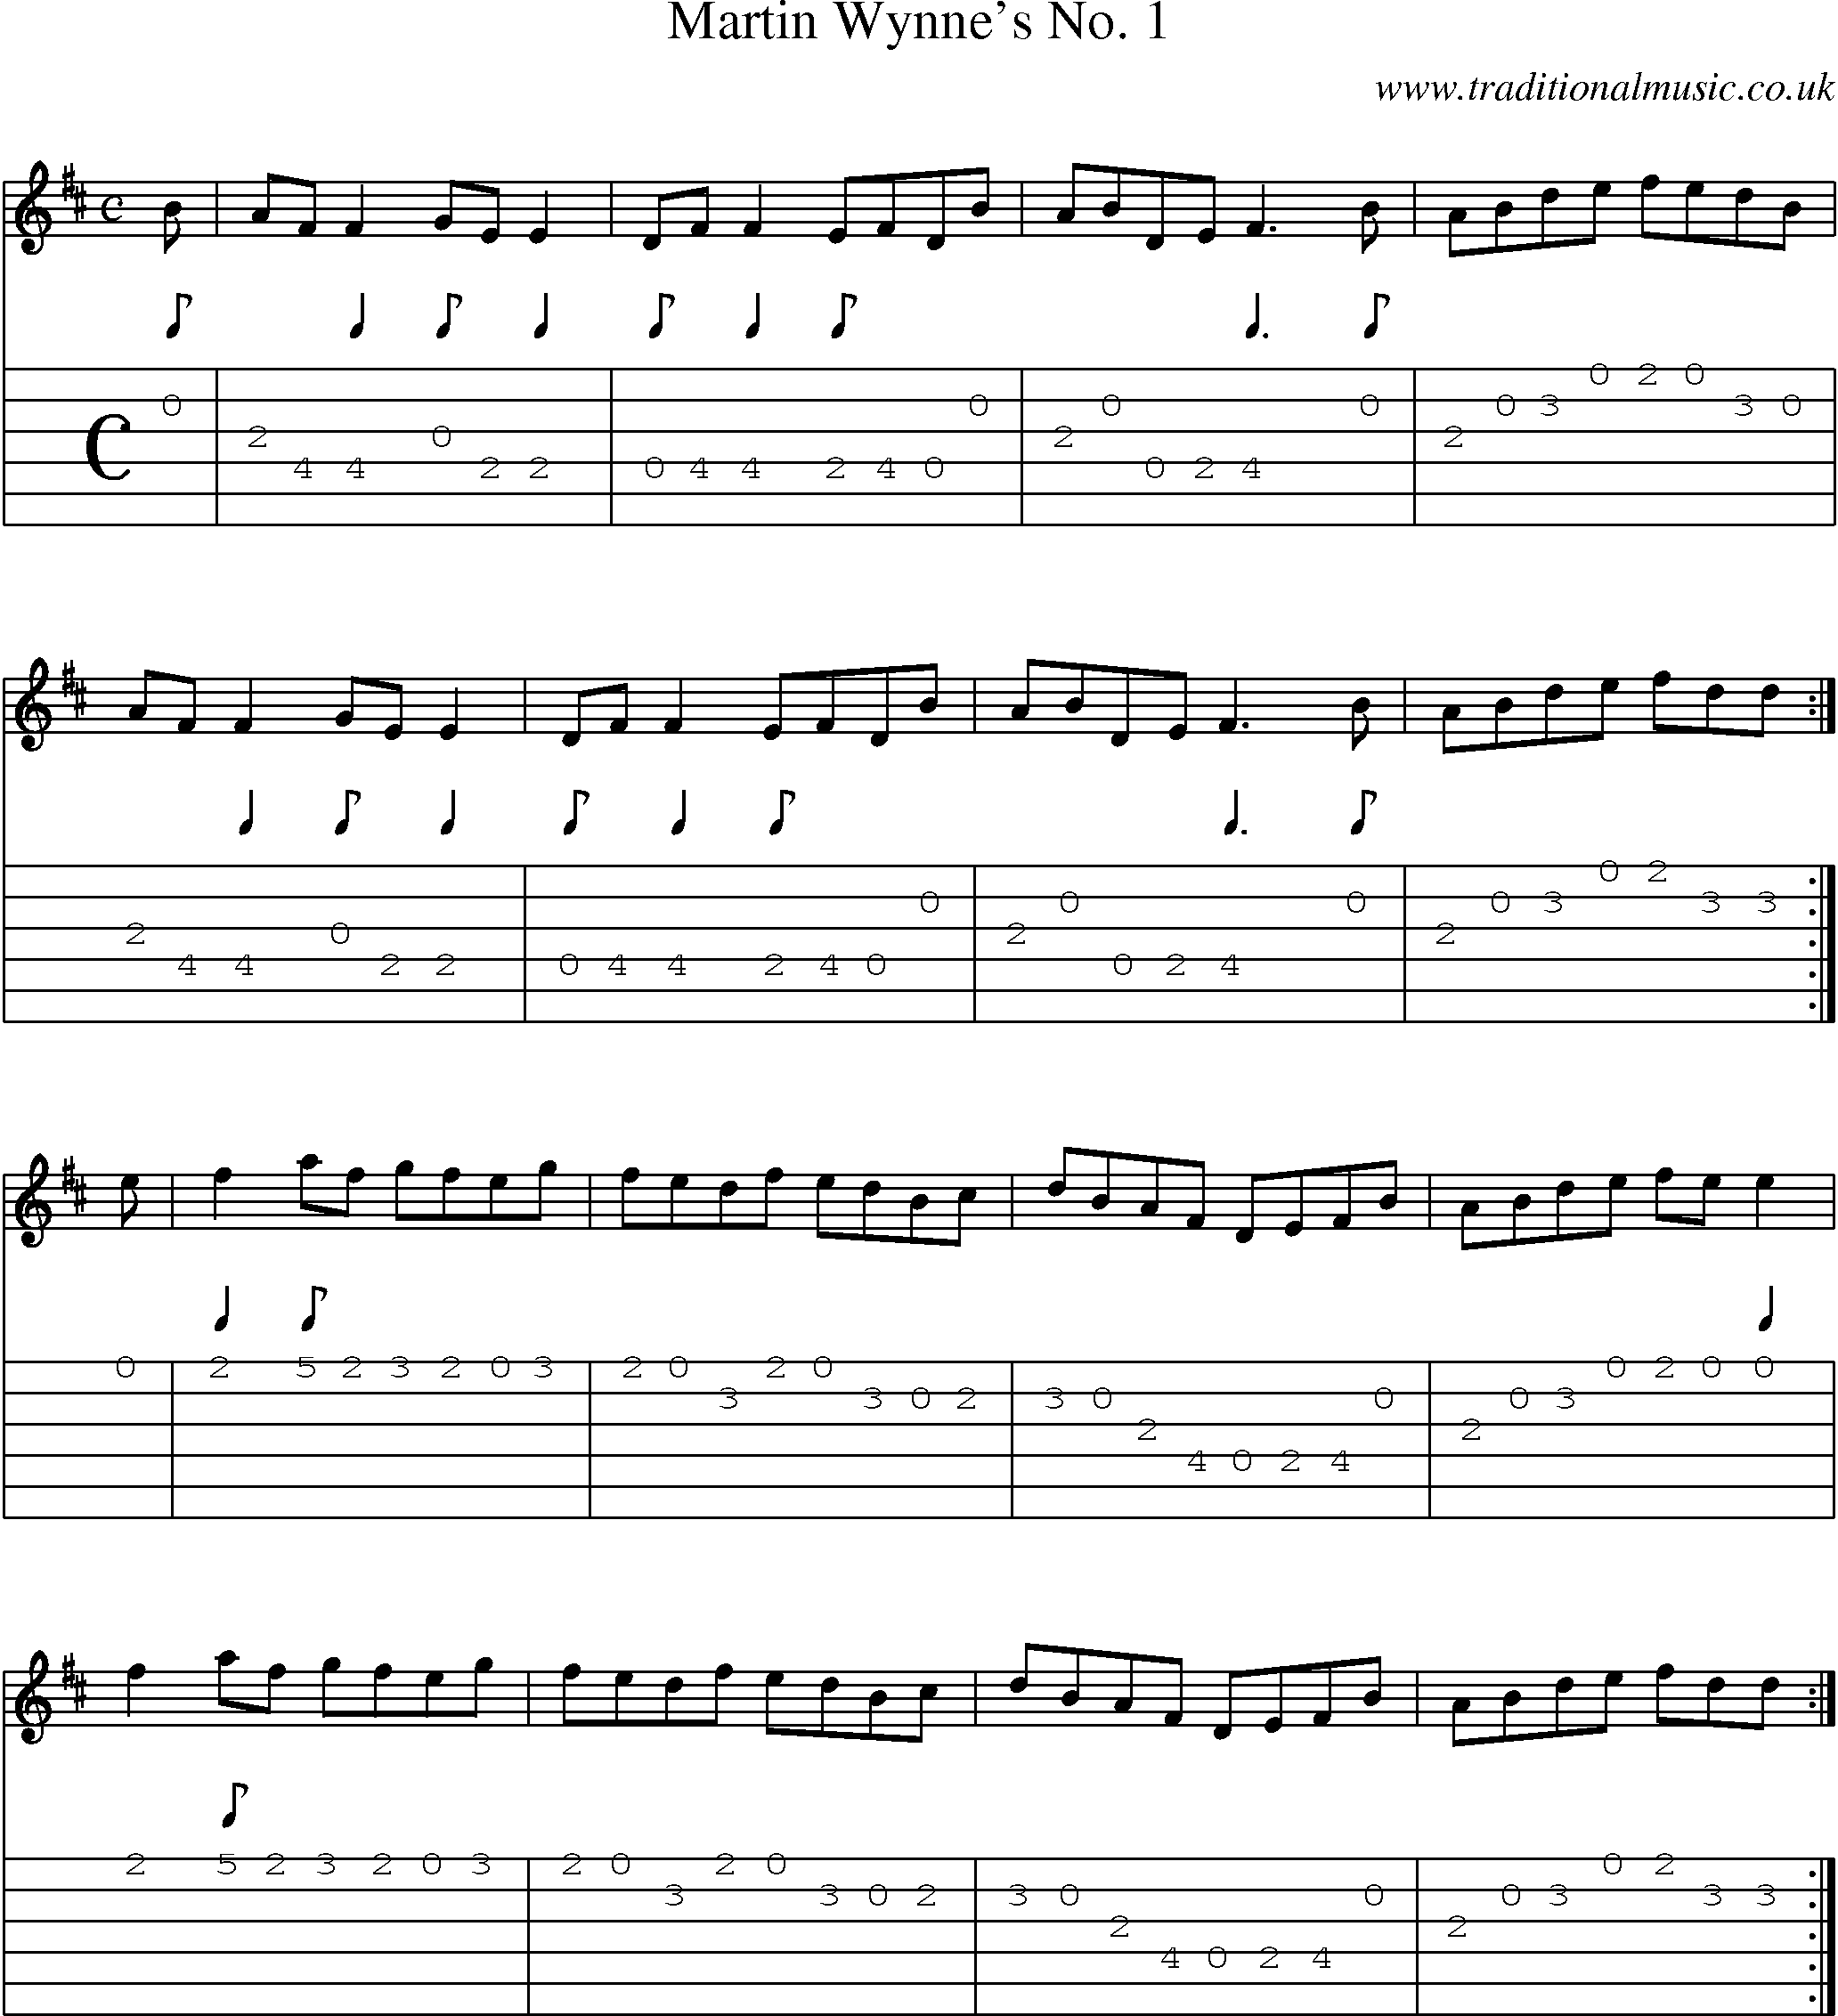 Music Score and Guitar Tabs for Martin Wynnes No 1